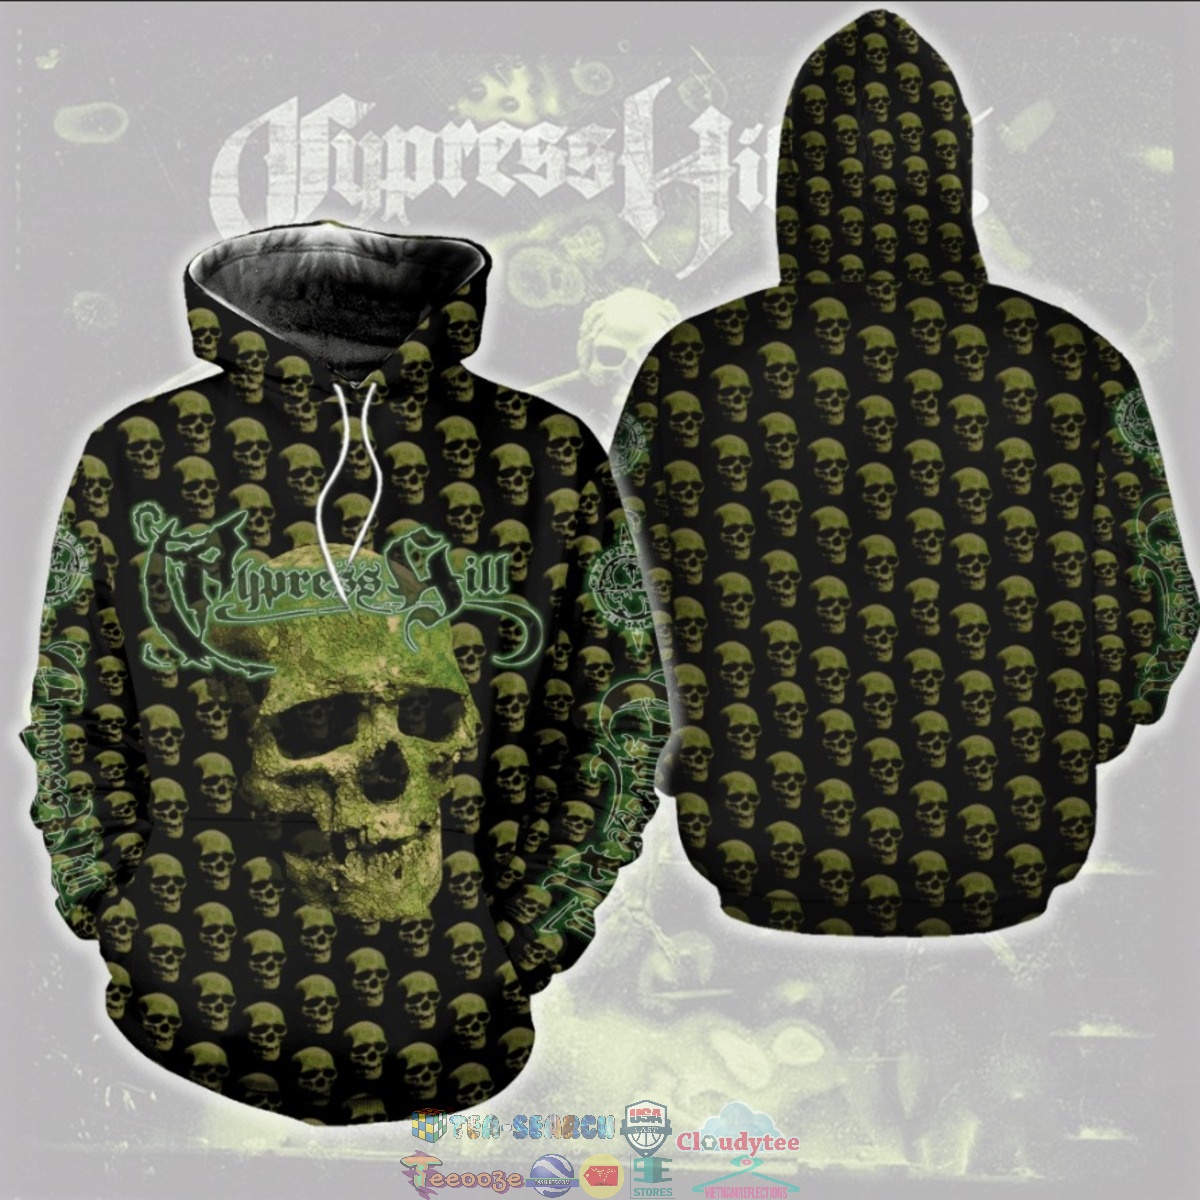 Cypress Hill ver 4 3D hoodie and t-shirt